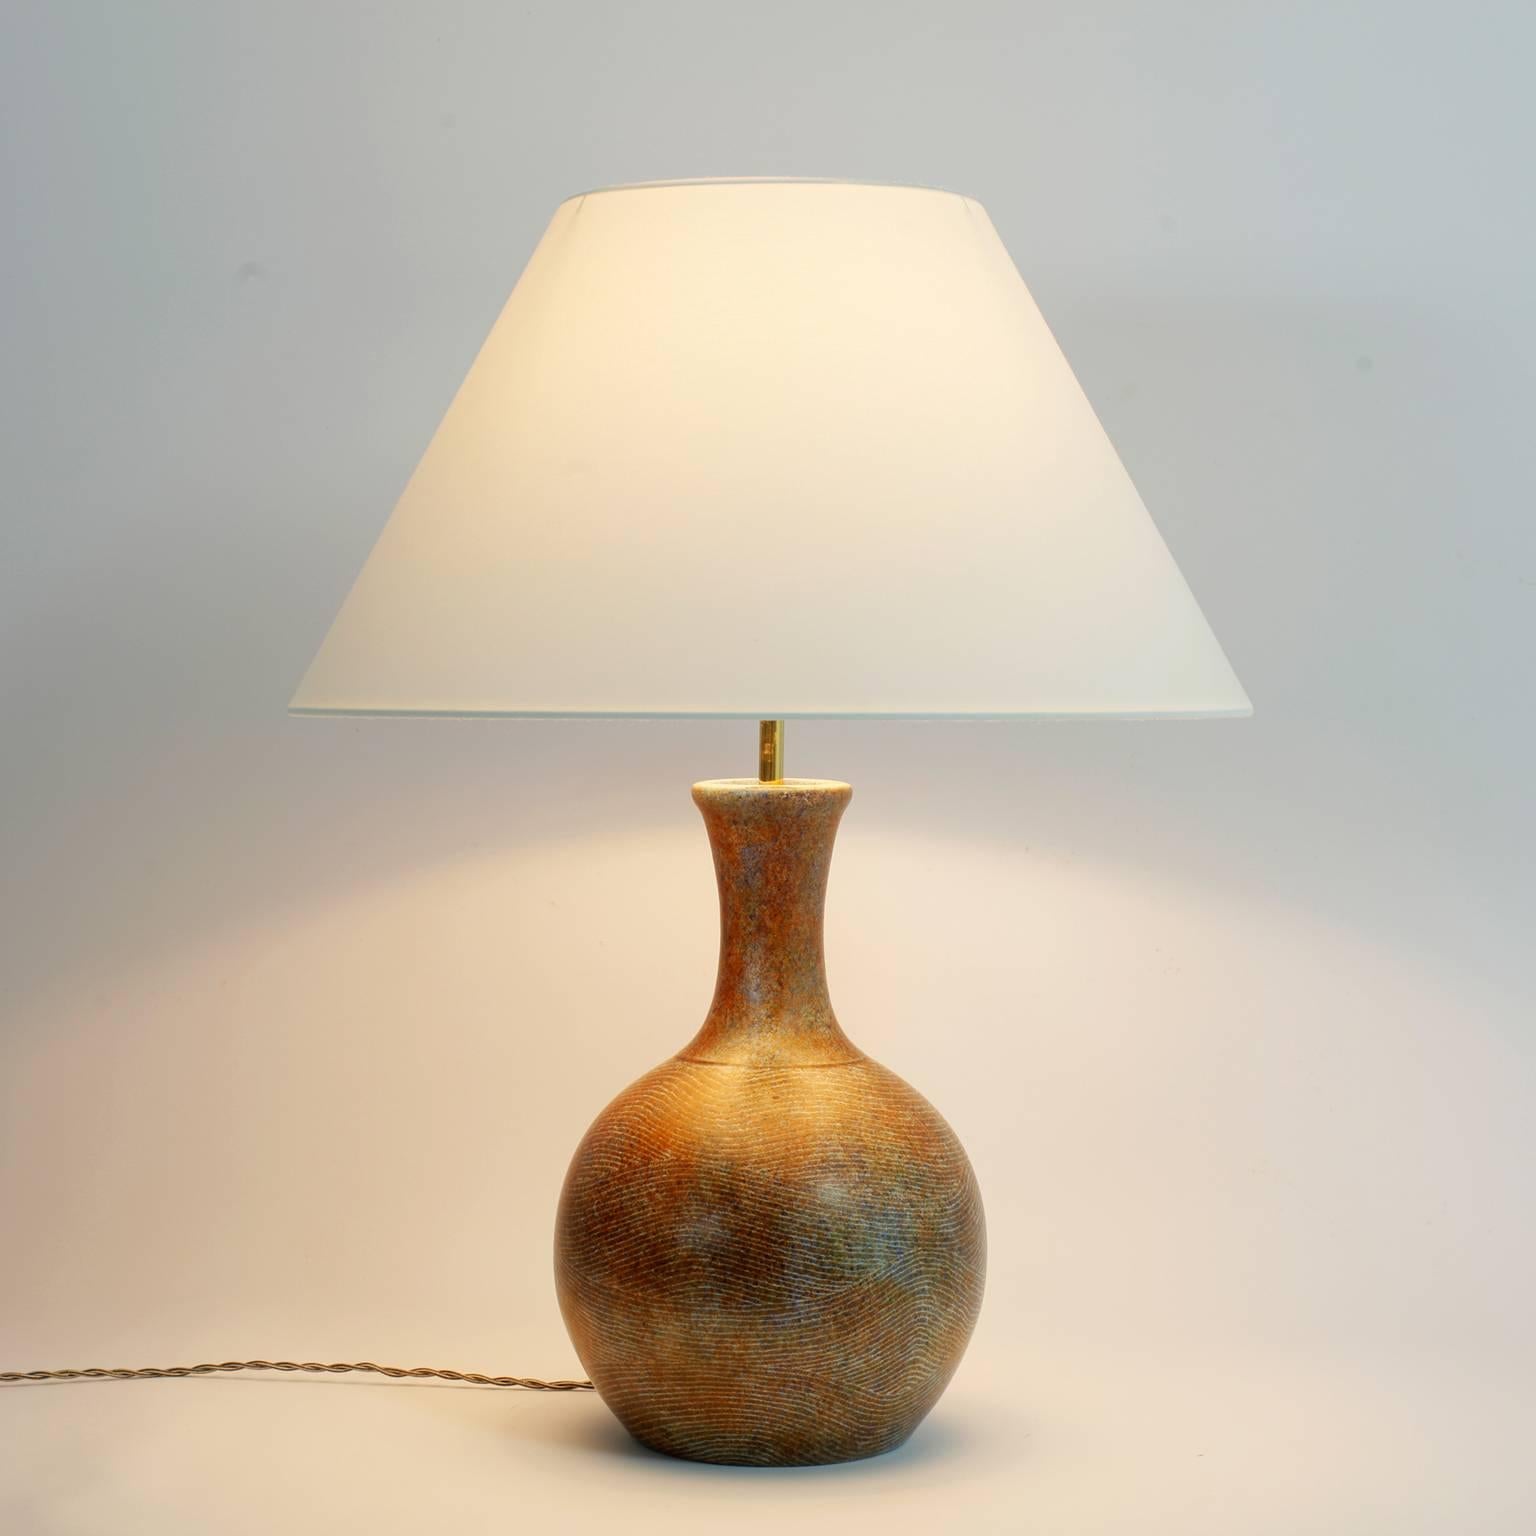 A large Ceramic lamp by René and Madeleine de Valence, French ceramists in the fifties.
Signed La Grange aux Potiers.
Beautiful and shapely scarified enamelled piece with bluish tints
Ceramic height alone without the socket 35 cm / 14 in.
Total